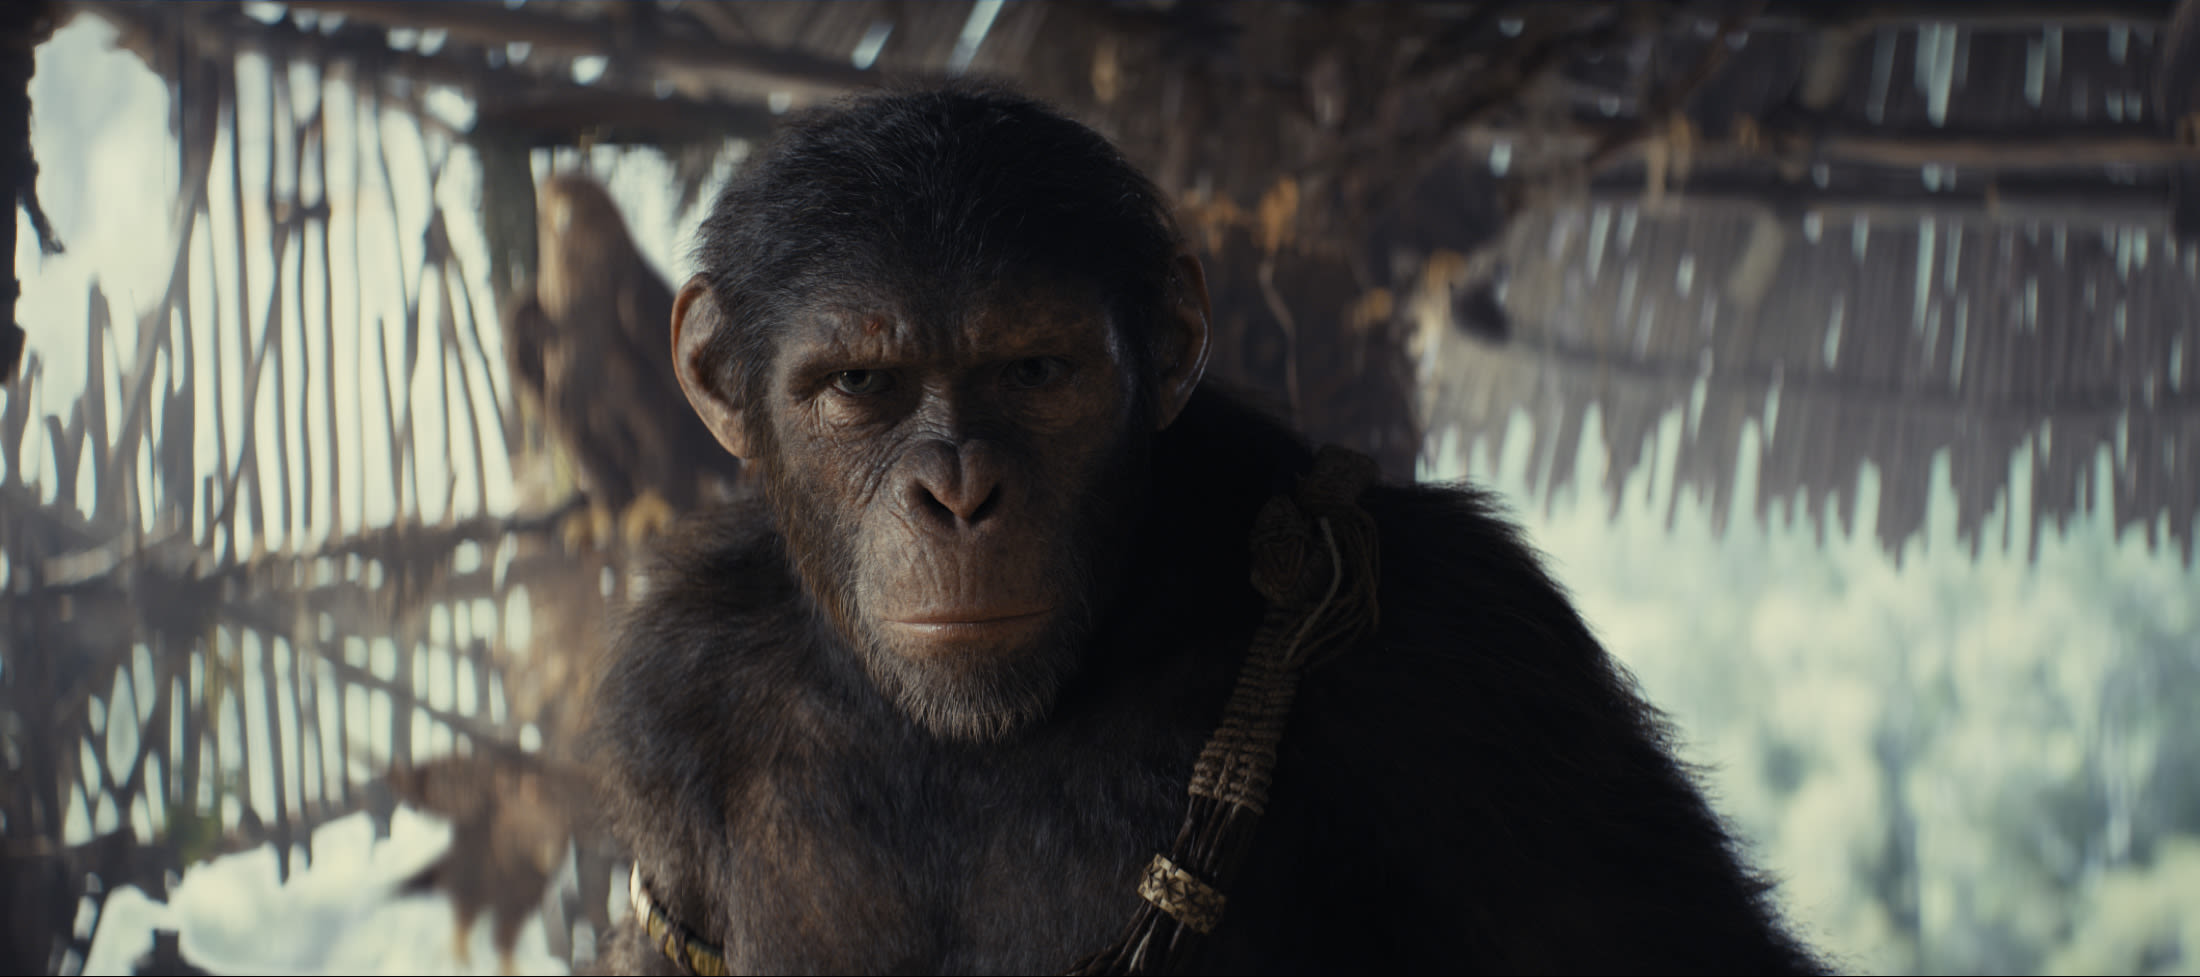 Everything you need to know before watching Kingdom of the Planet of the Apes